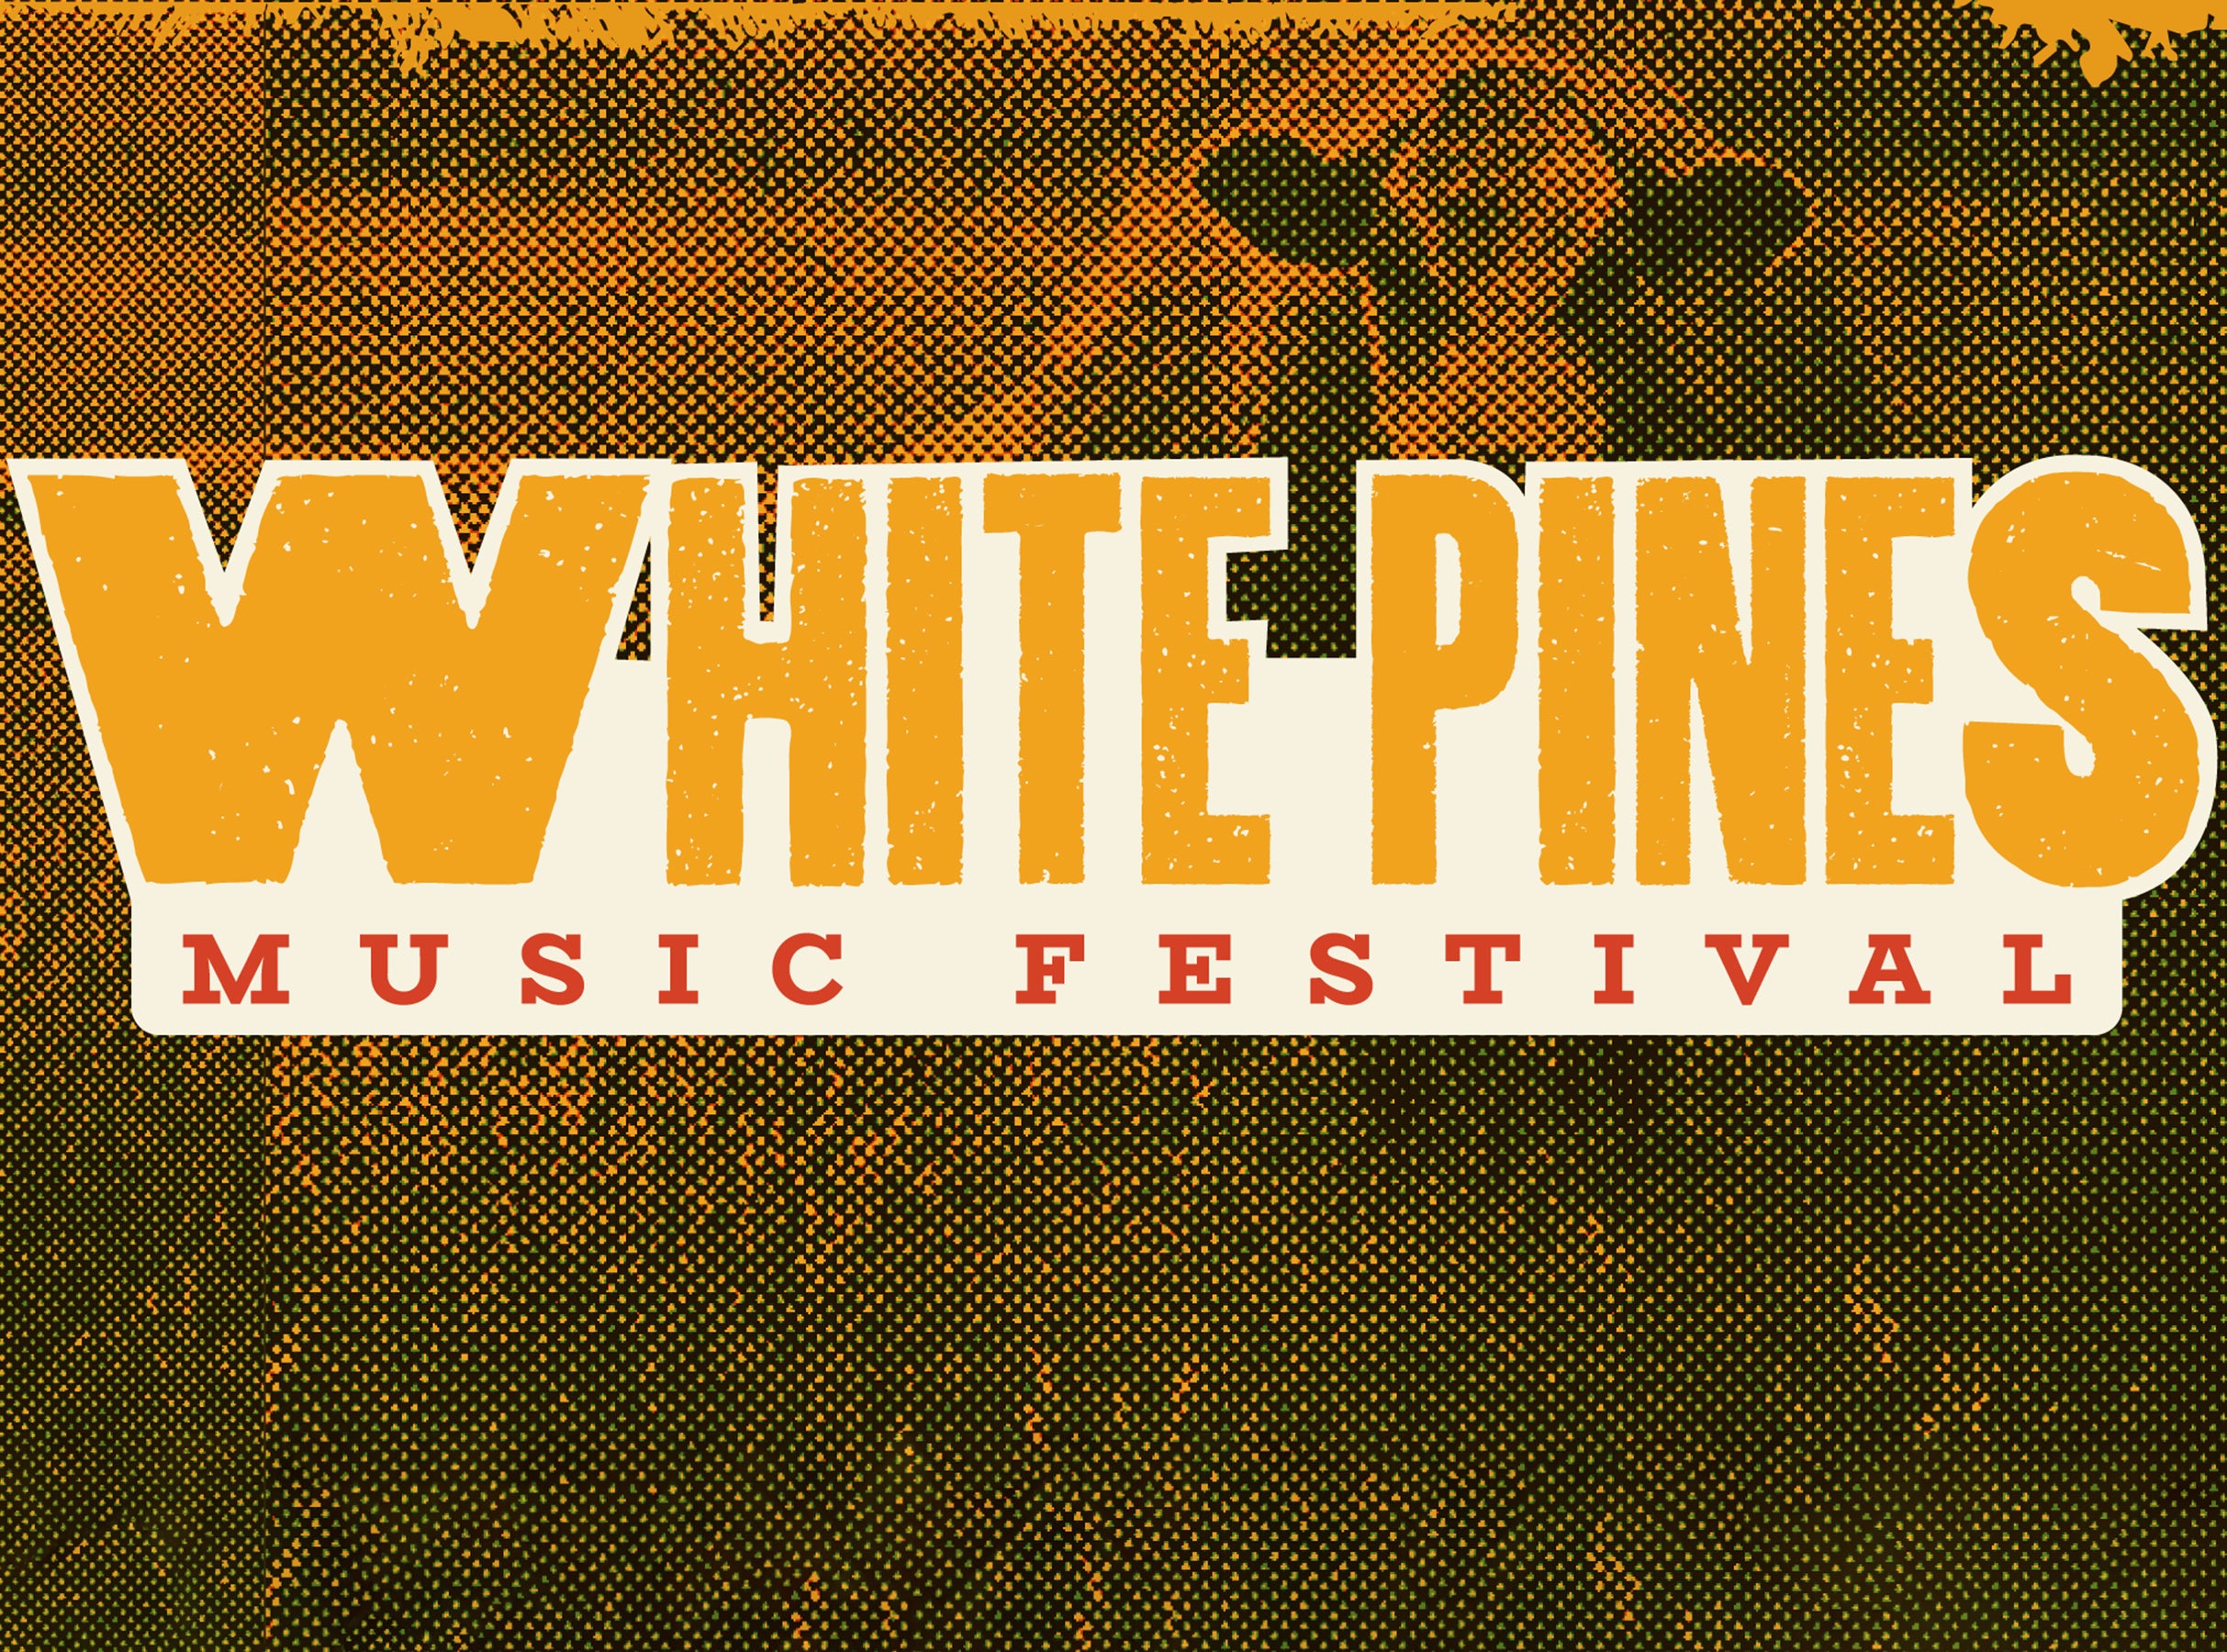 Ticket Reselling White Pines Music Festival